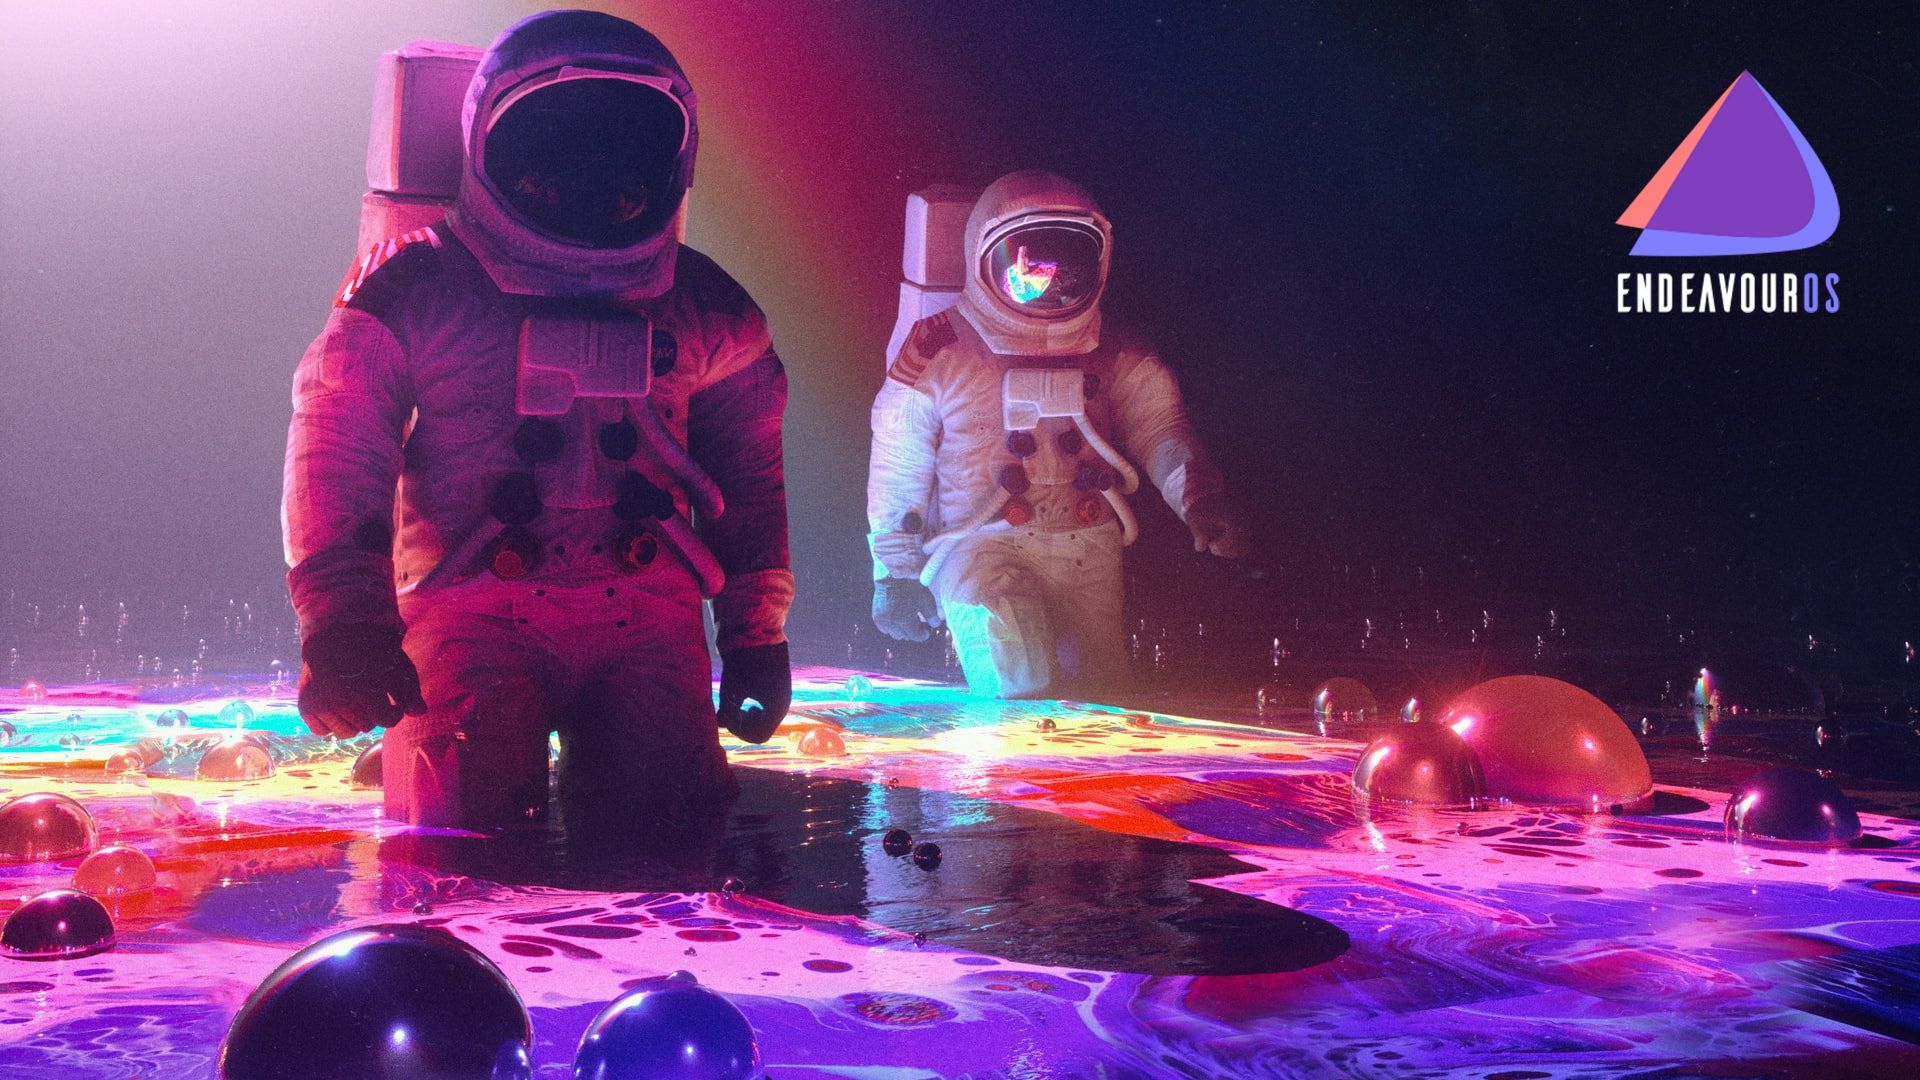 Two astronauts walking on a planet with neon lights - Astronaut